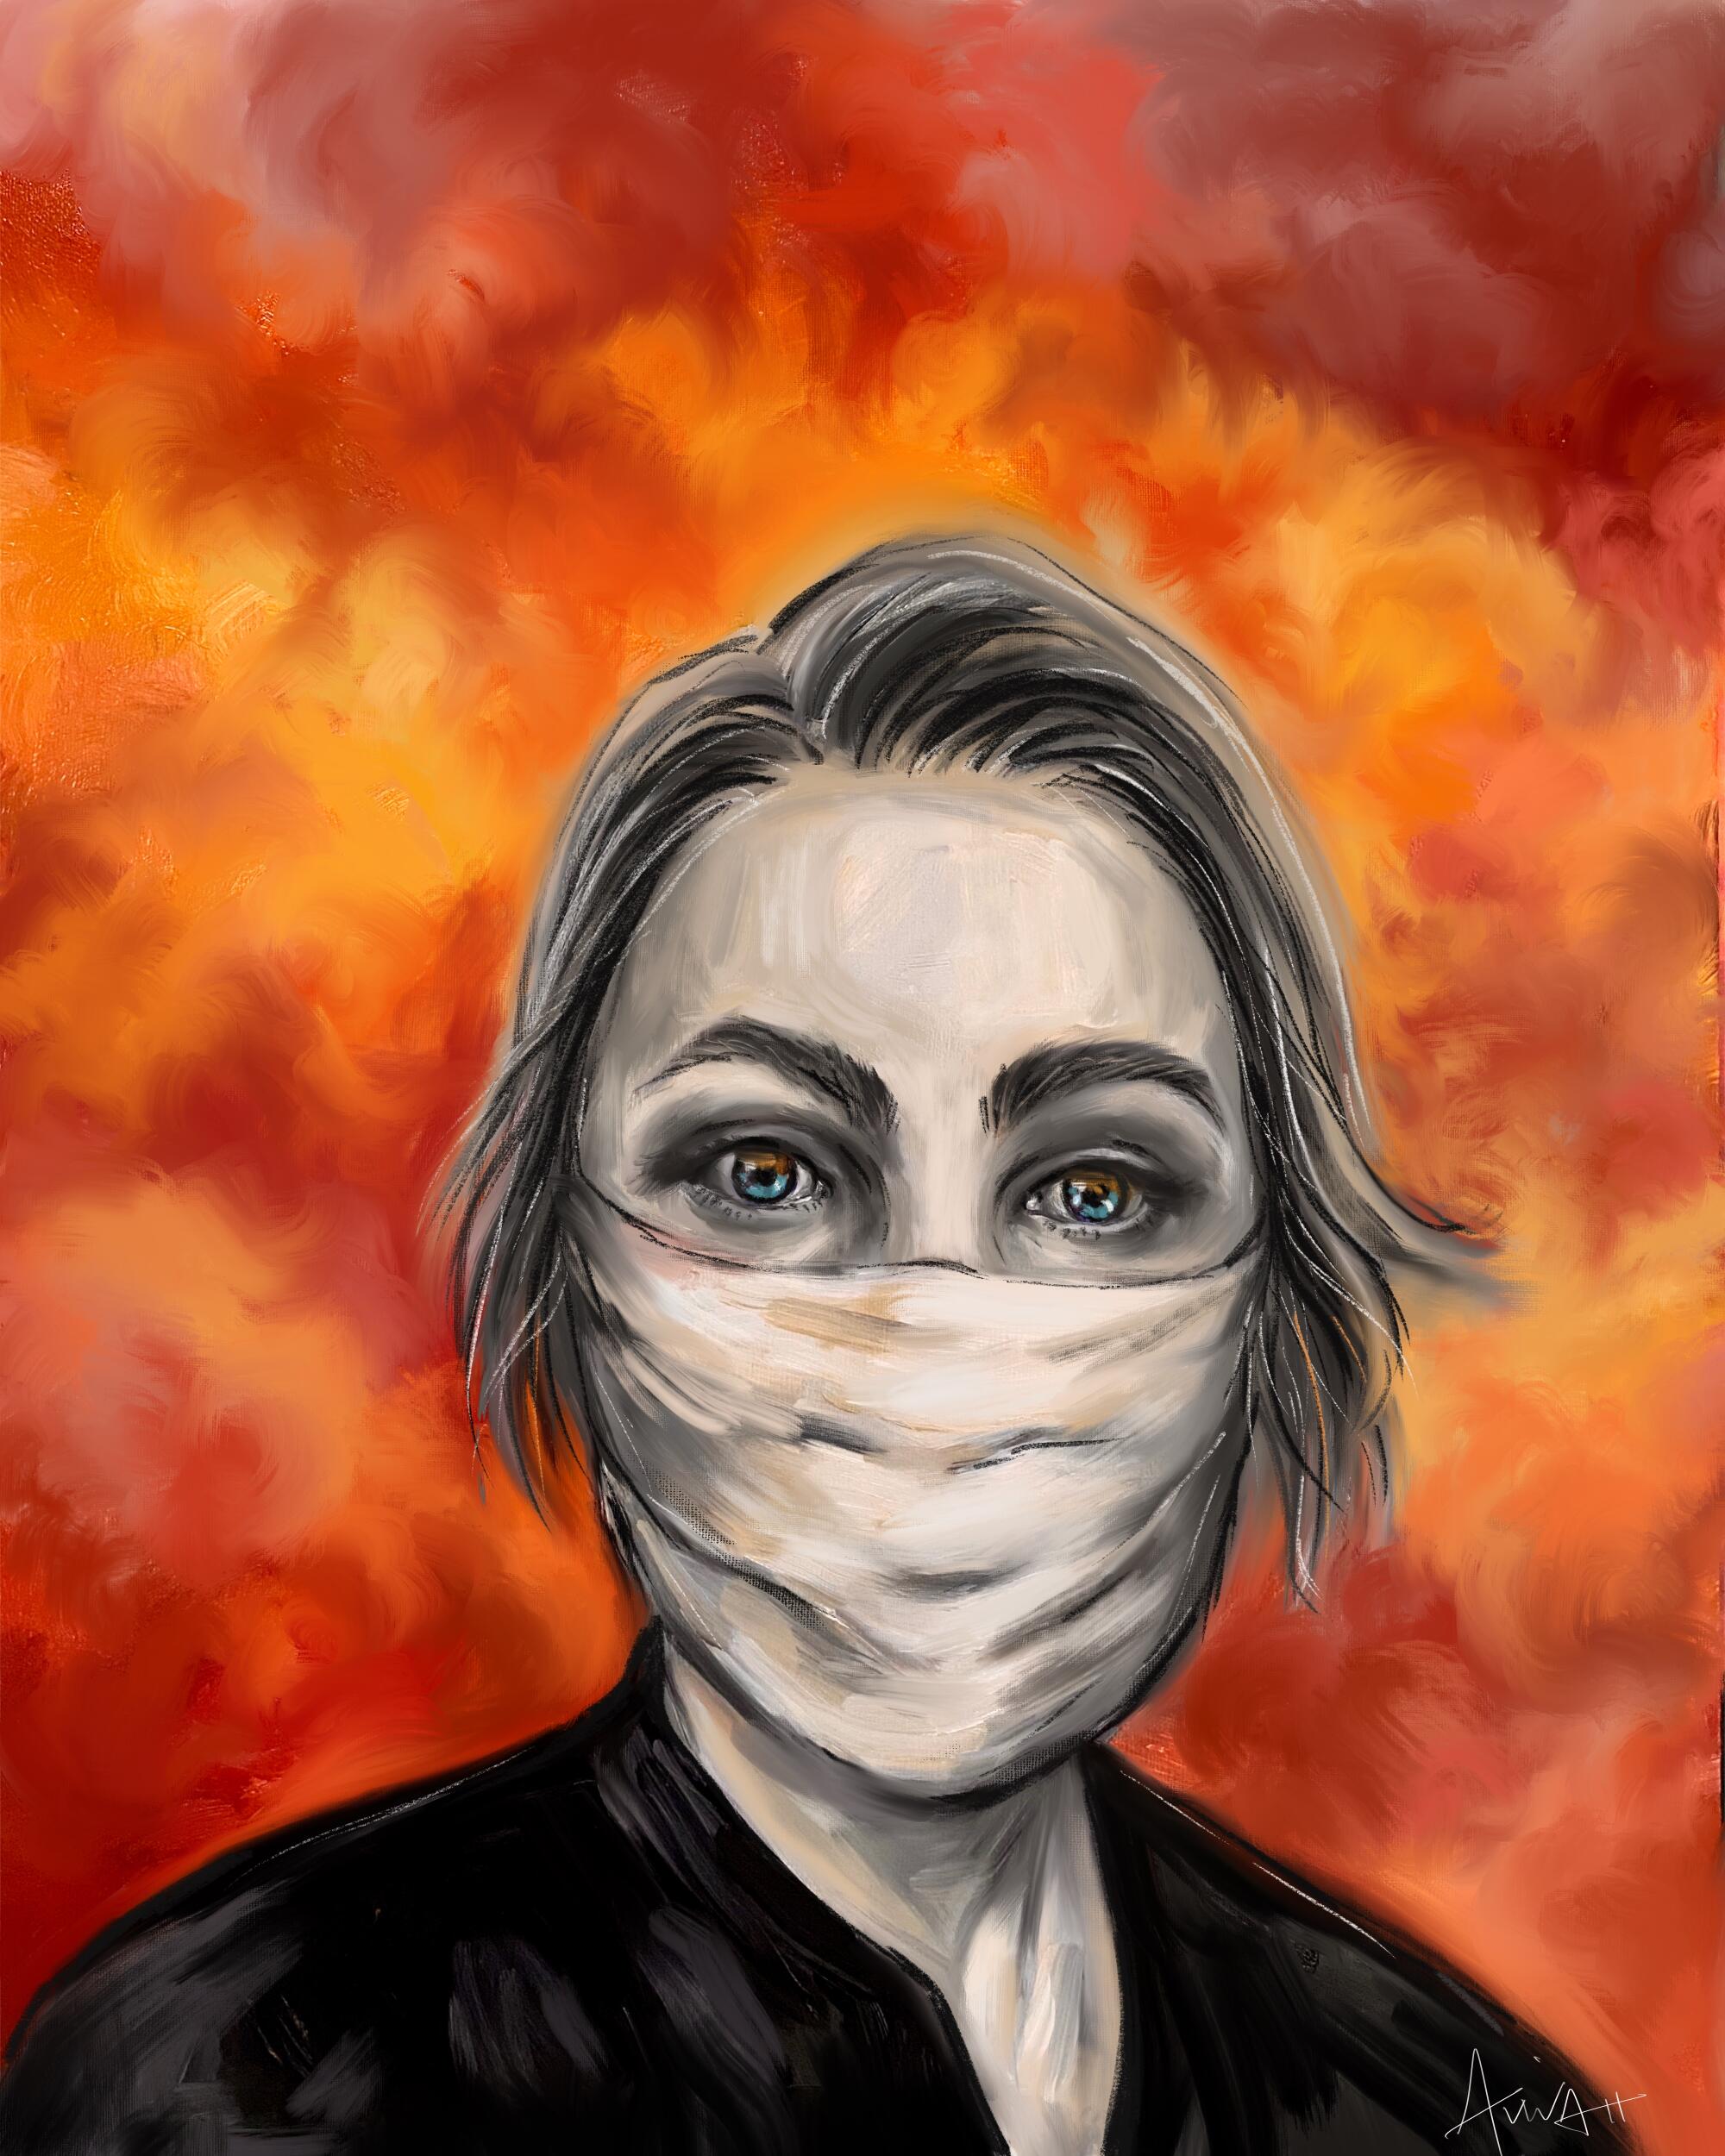 A painting of a woman in a mask as fire burns in the background